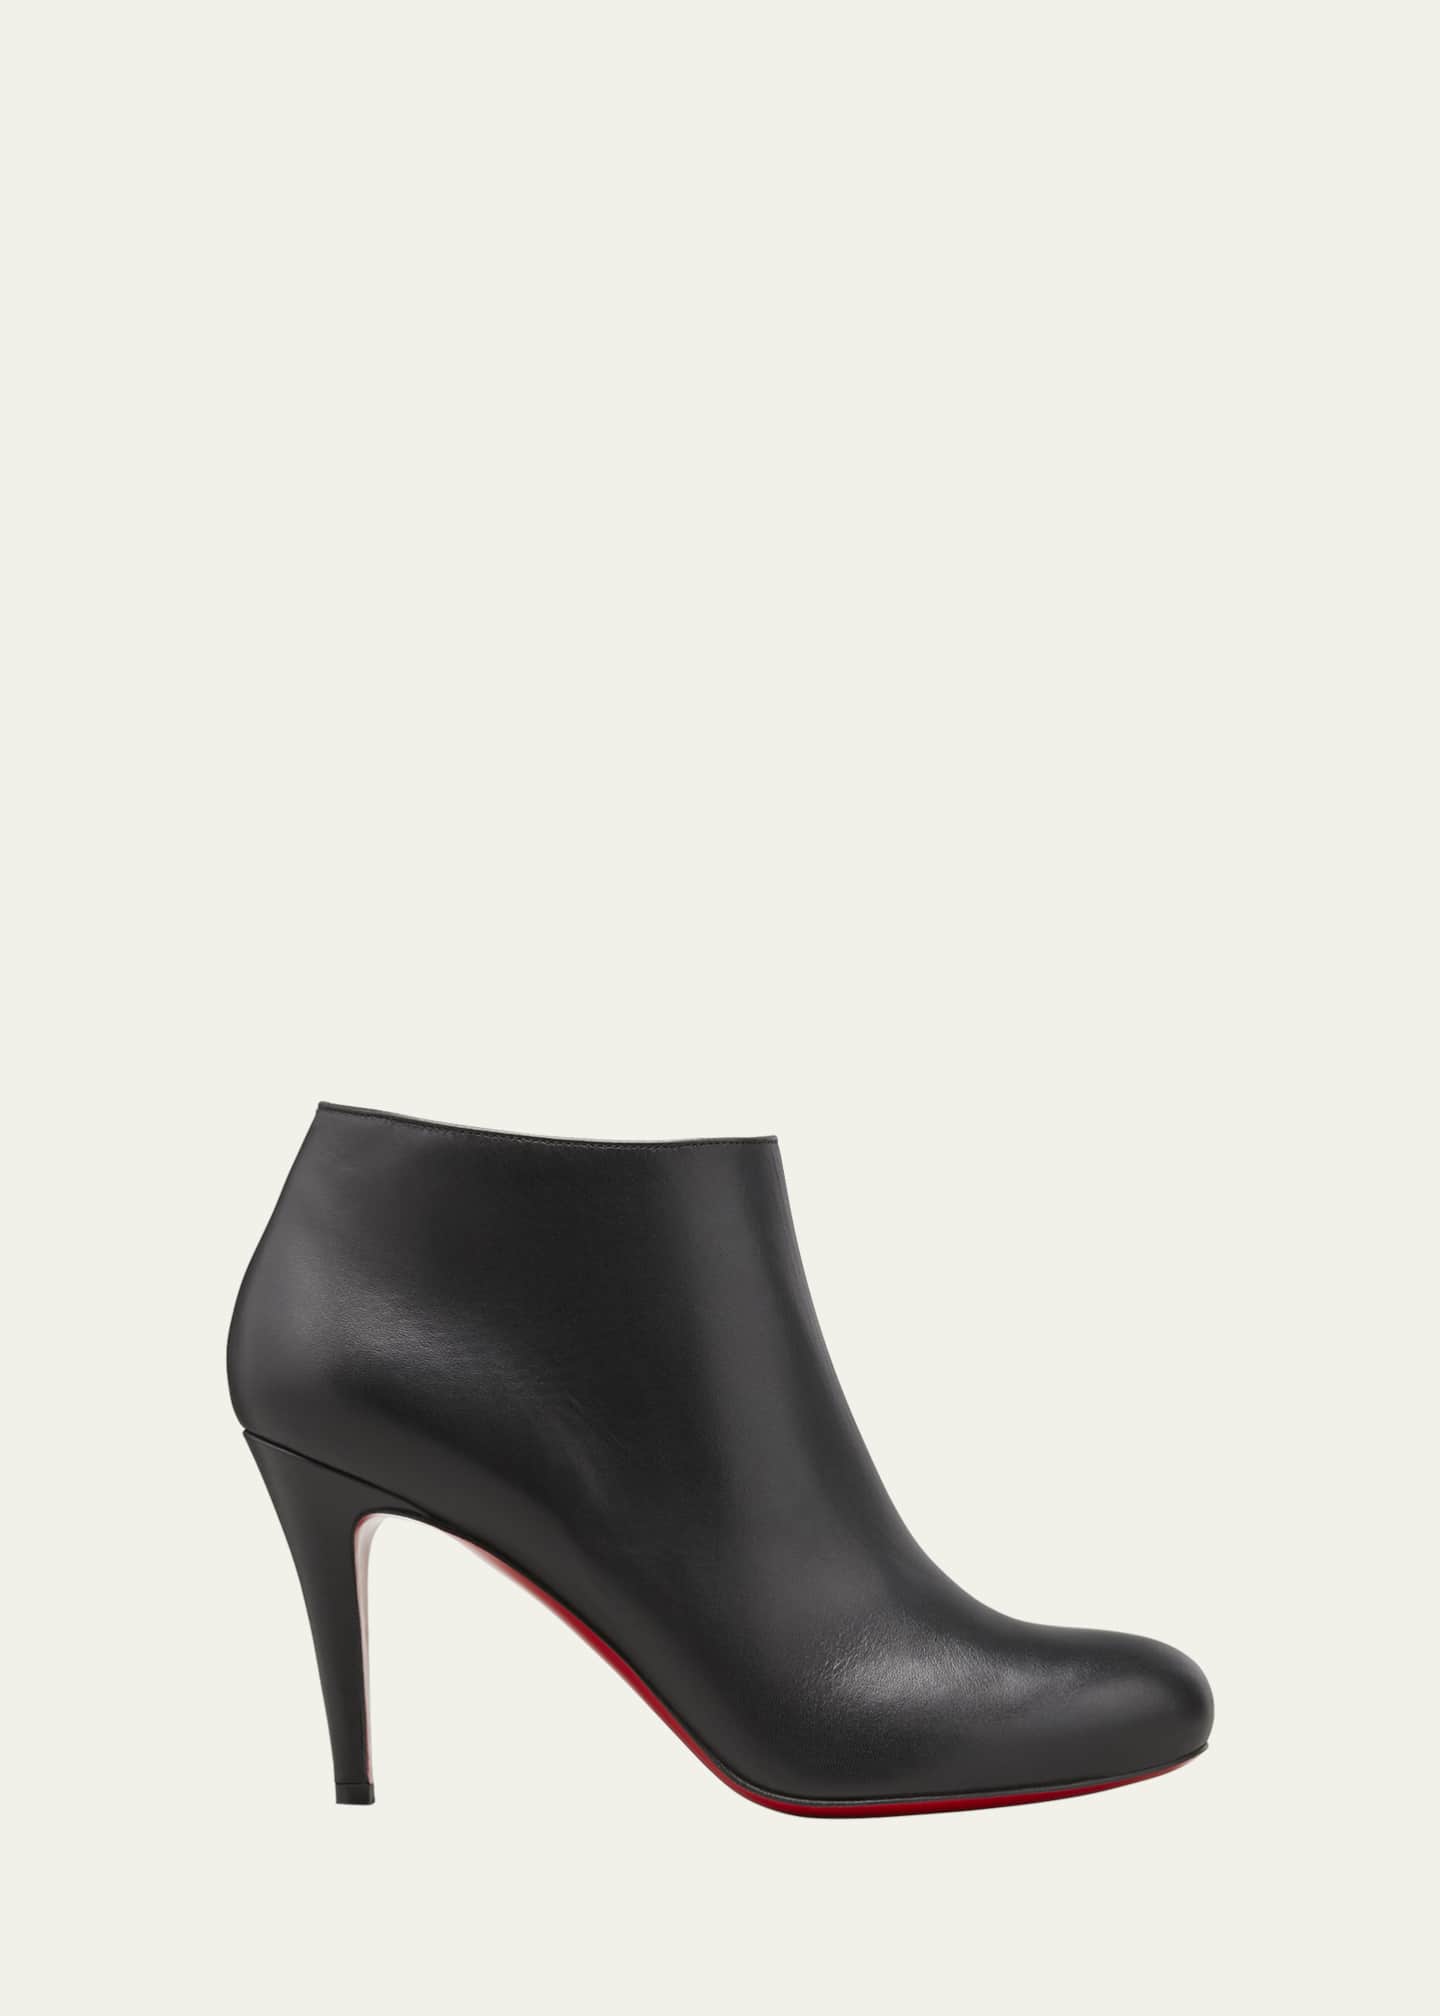 Christian Louboutin Women's Belle Ankle Boots